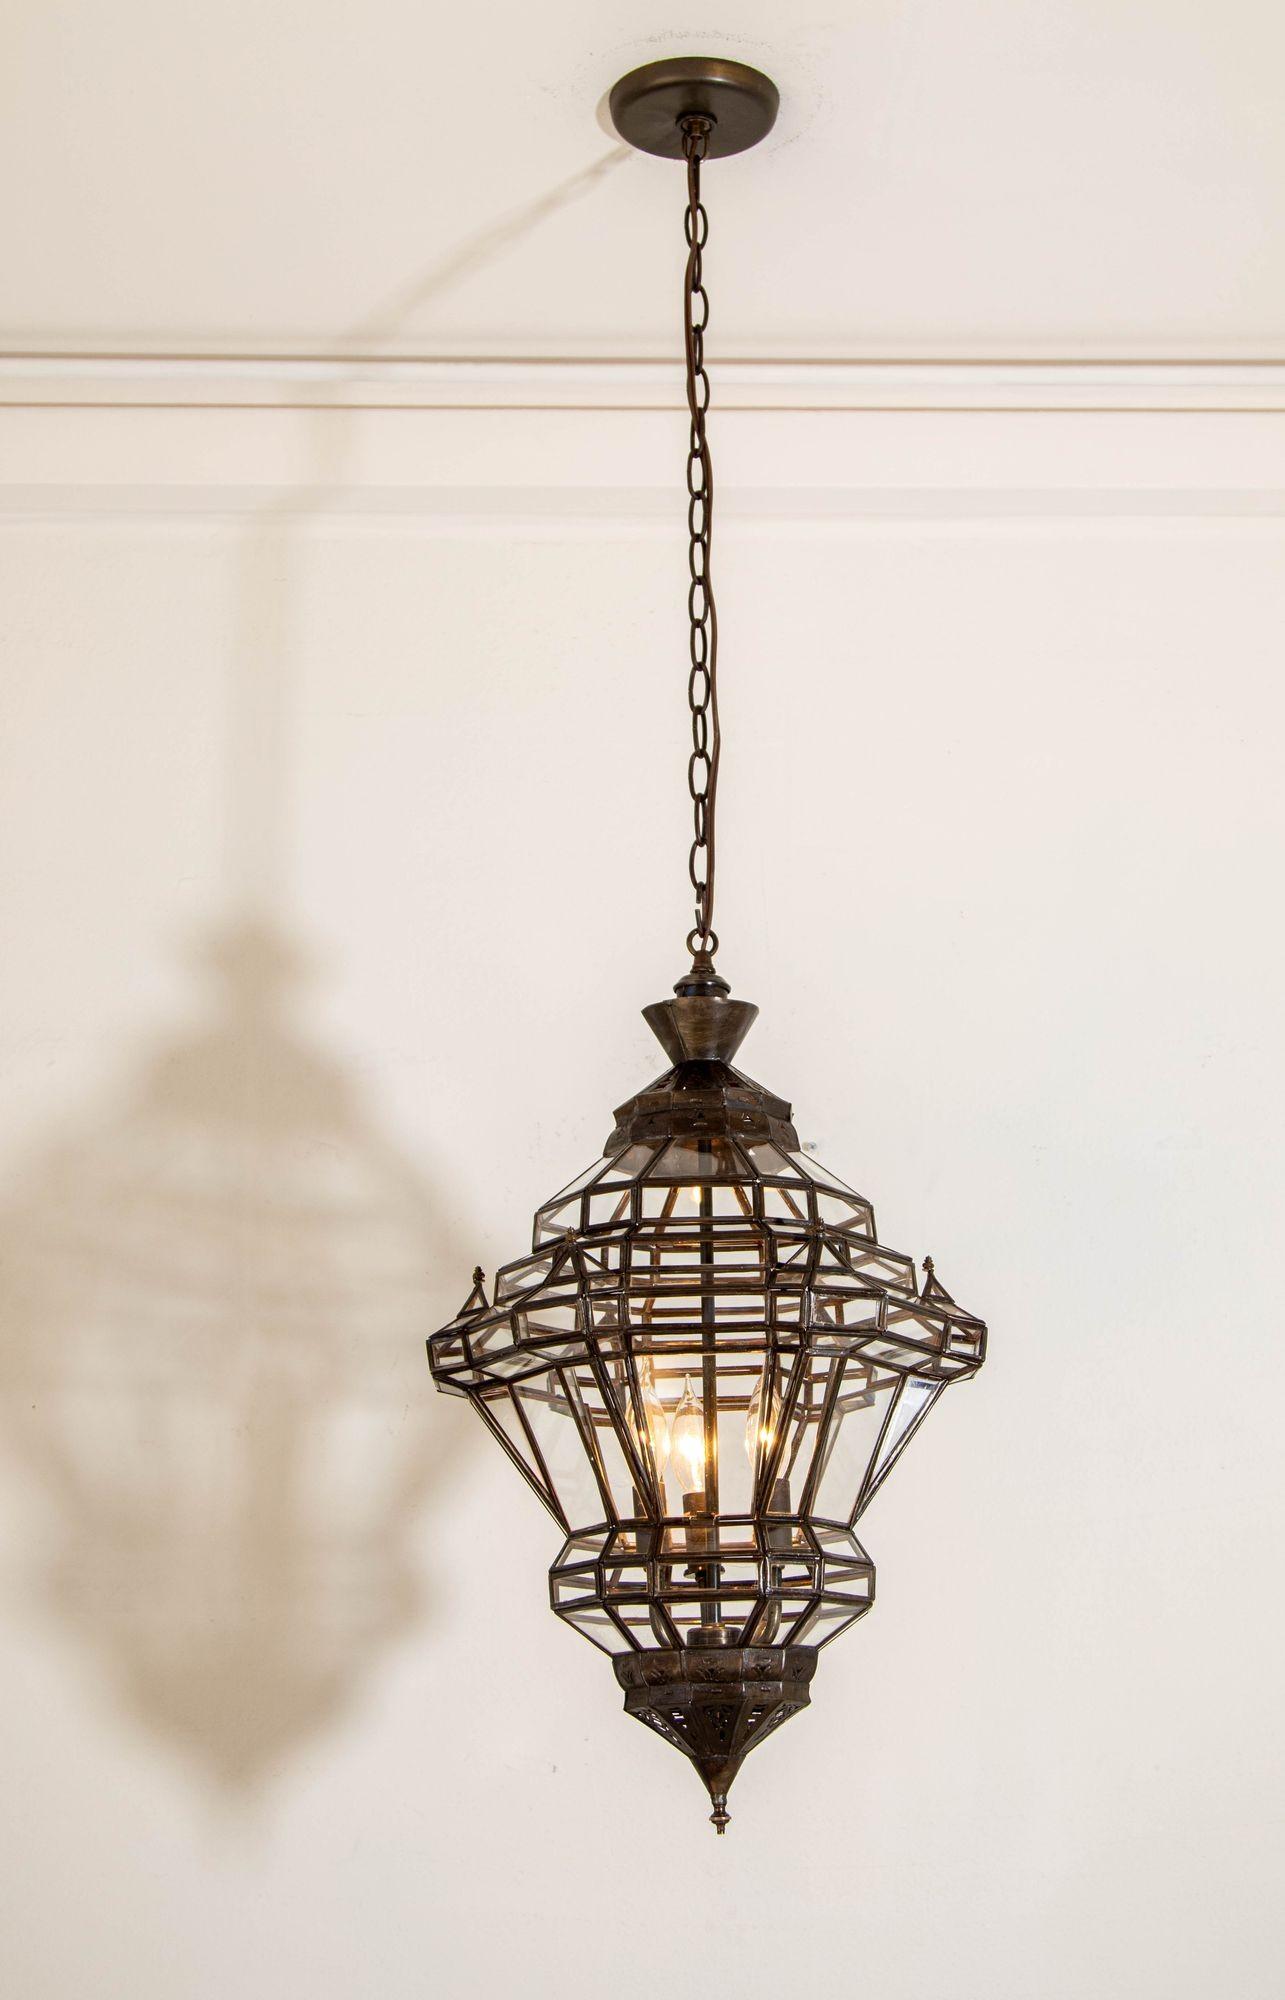 Vintage Moroccan Clear Glass Lantern Moorish Granada Spanish Style In Good Condition For Sale In North Hollywood, CA